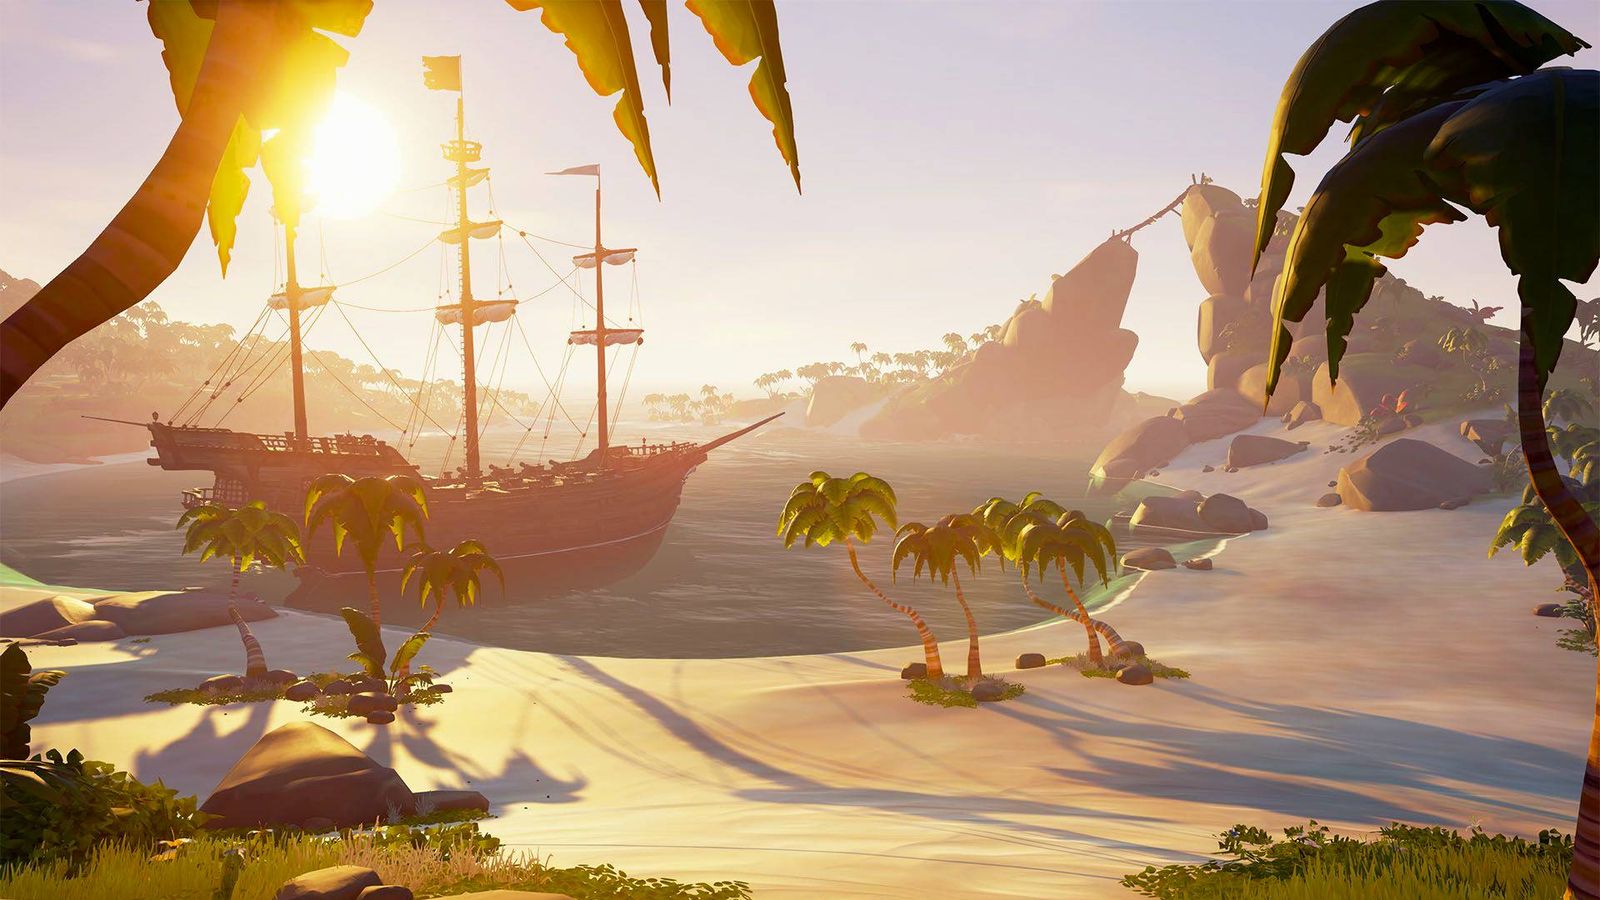 Smuggler's Bay in Sea of Thieves